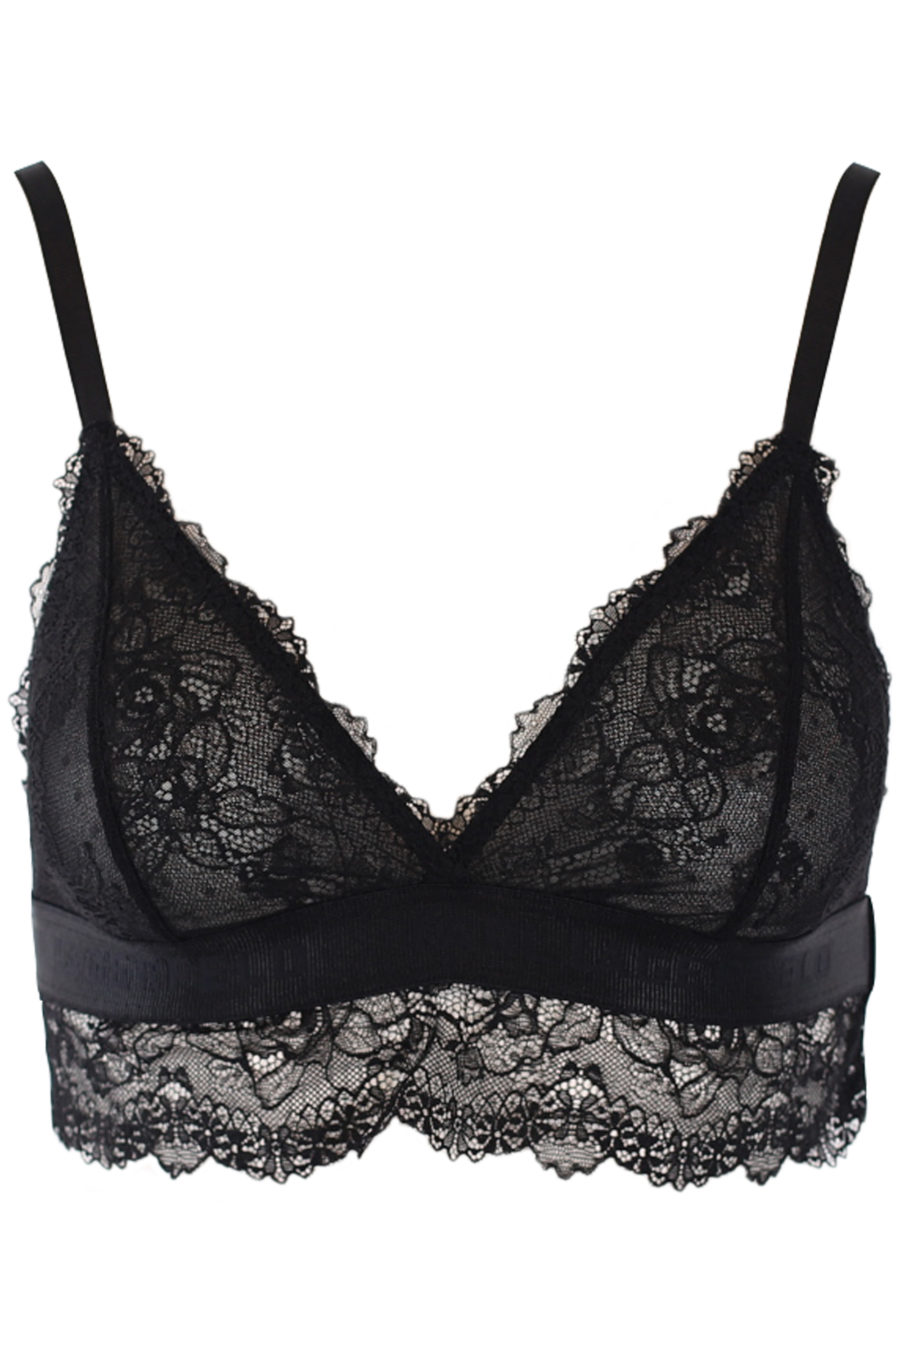 Black lace bra with long line - IMG 0649